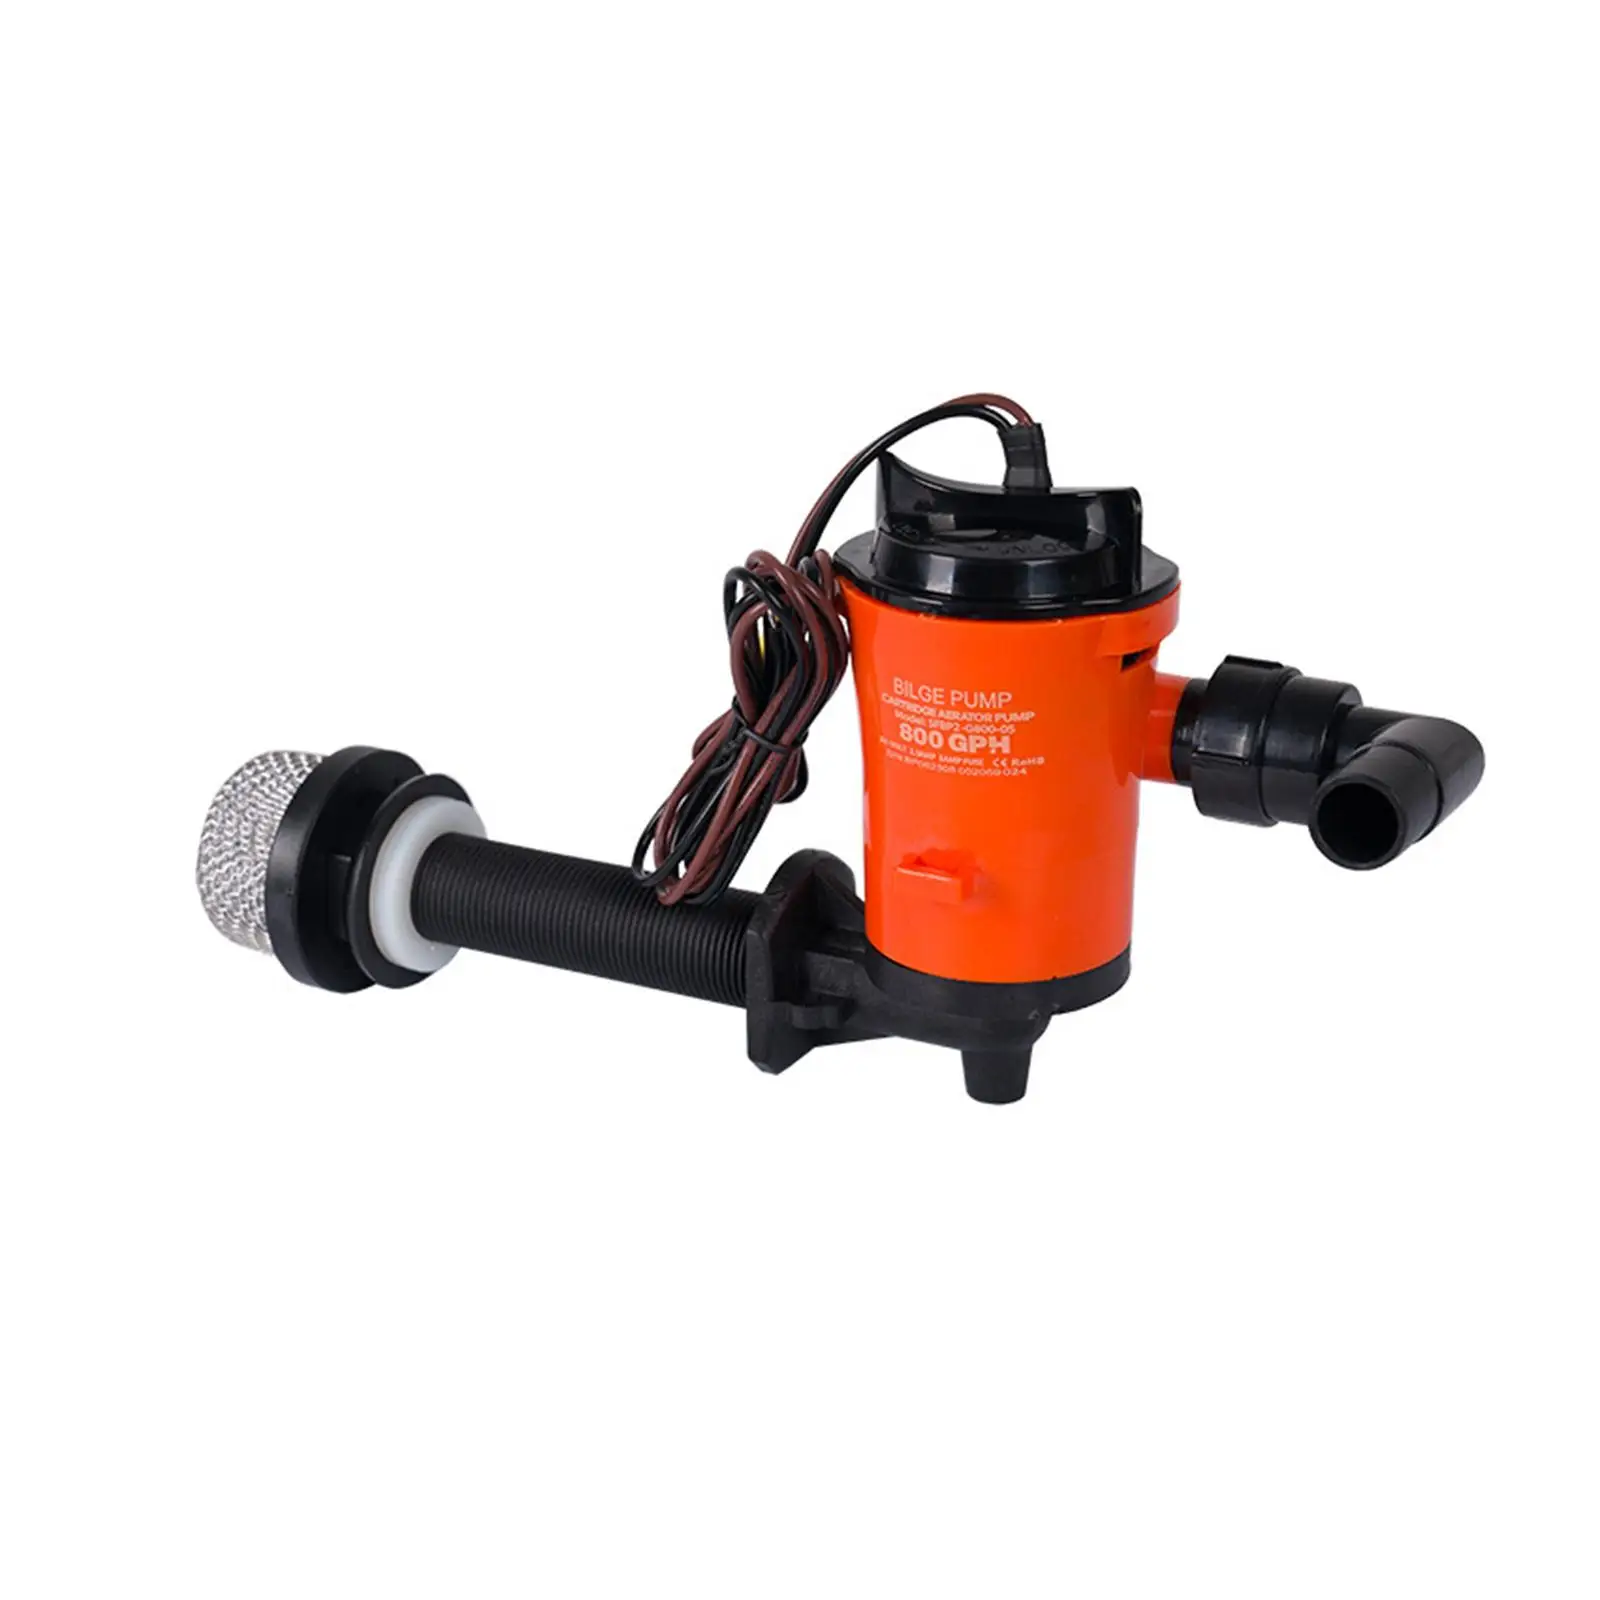 Livewell Pump for Boat Bilge Pump Easy to Install 24V 800GPH Durable Accessories Direct Replaces Easy to Clean Boat Aerator Pump